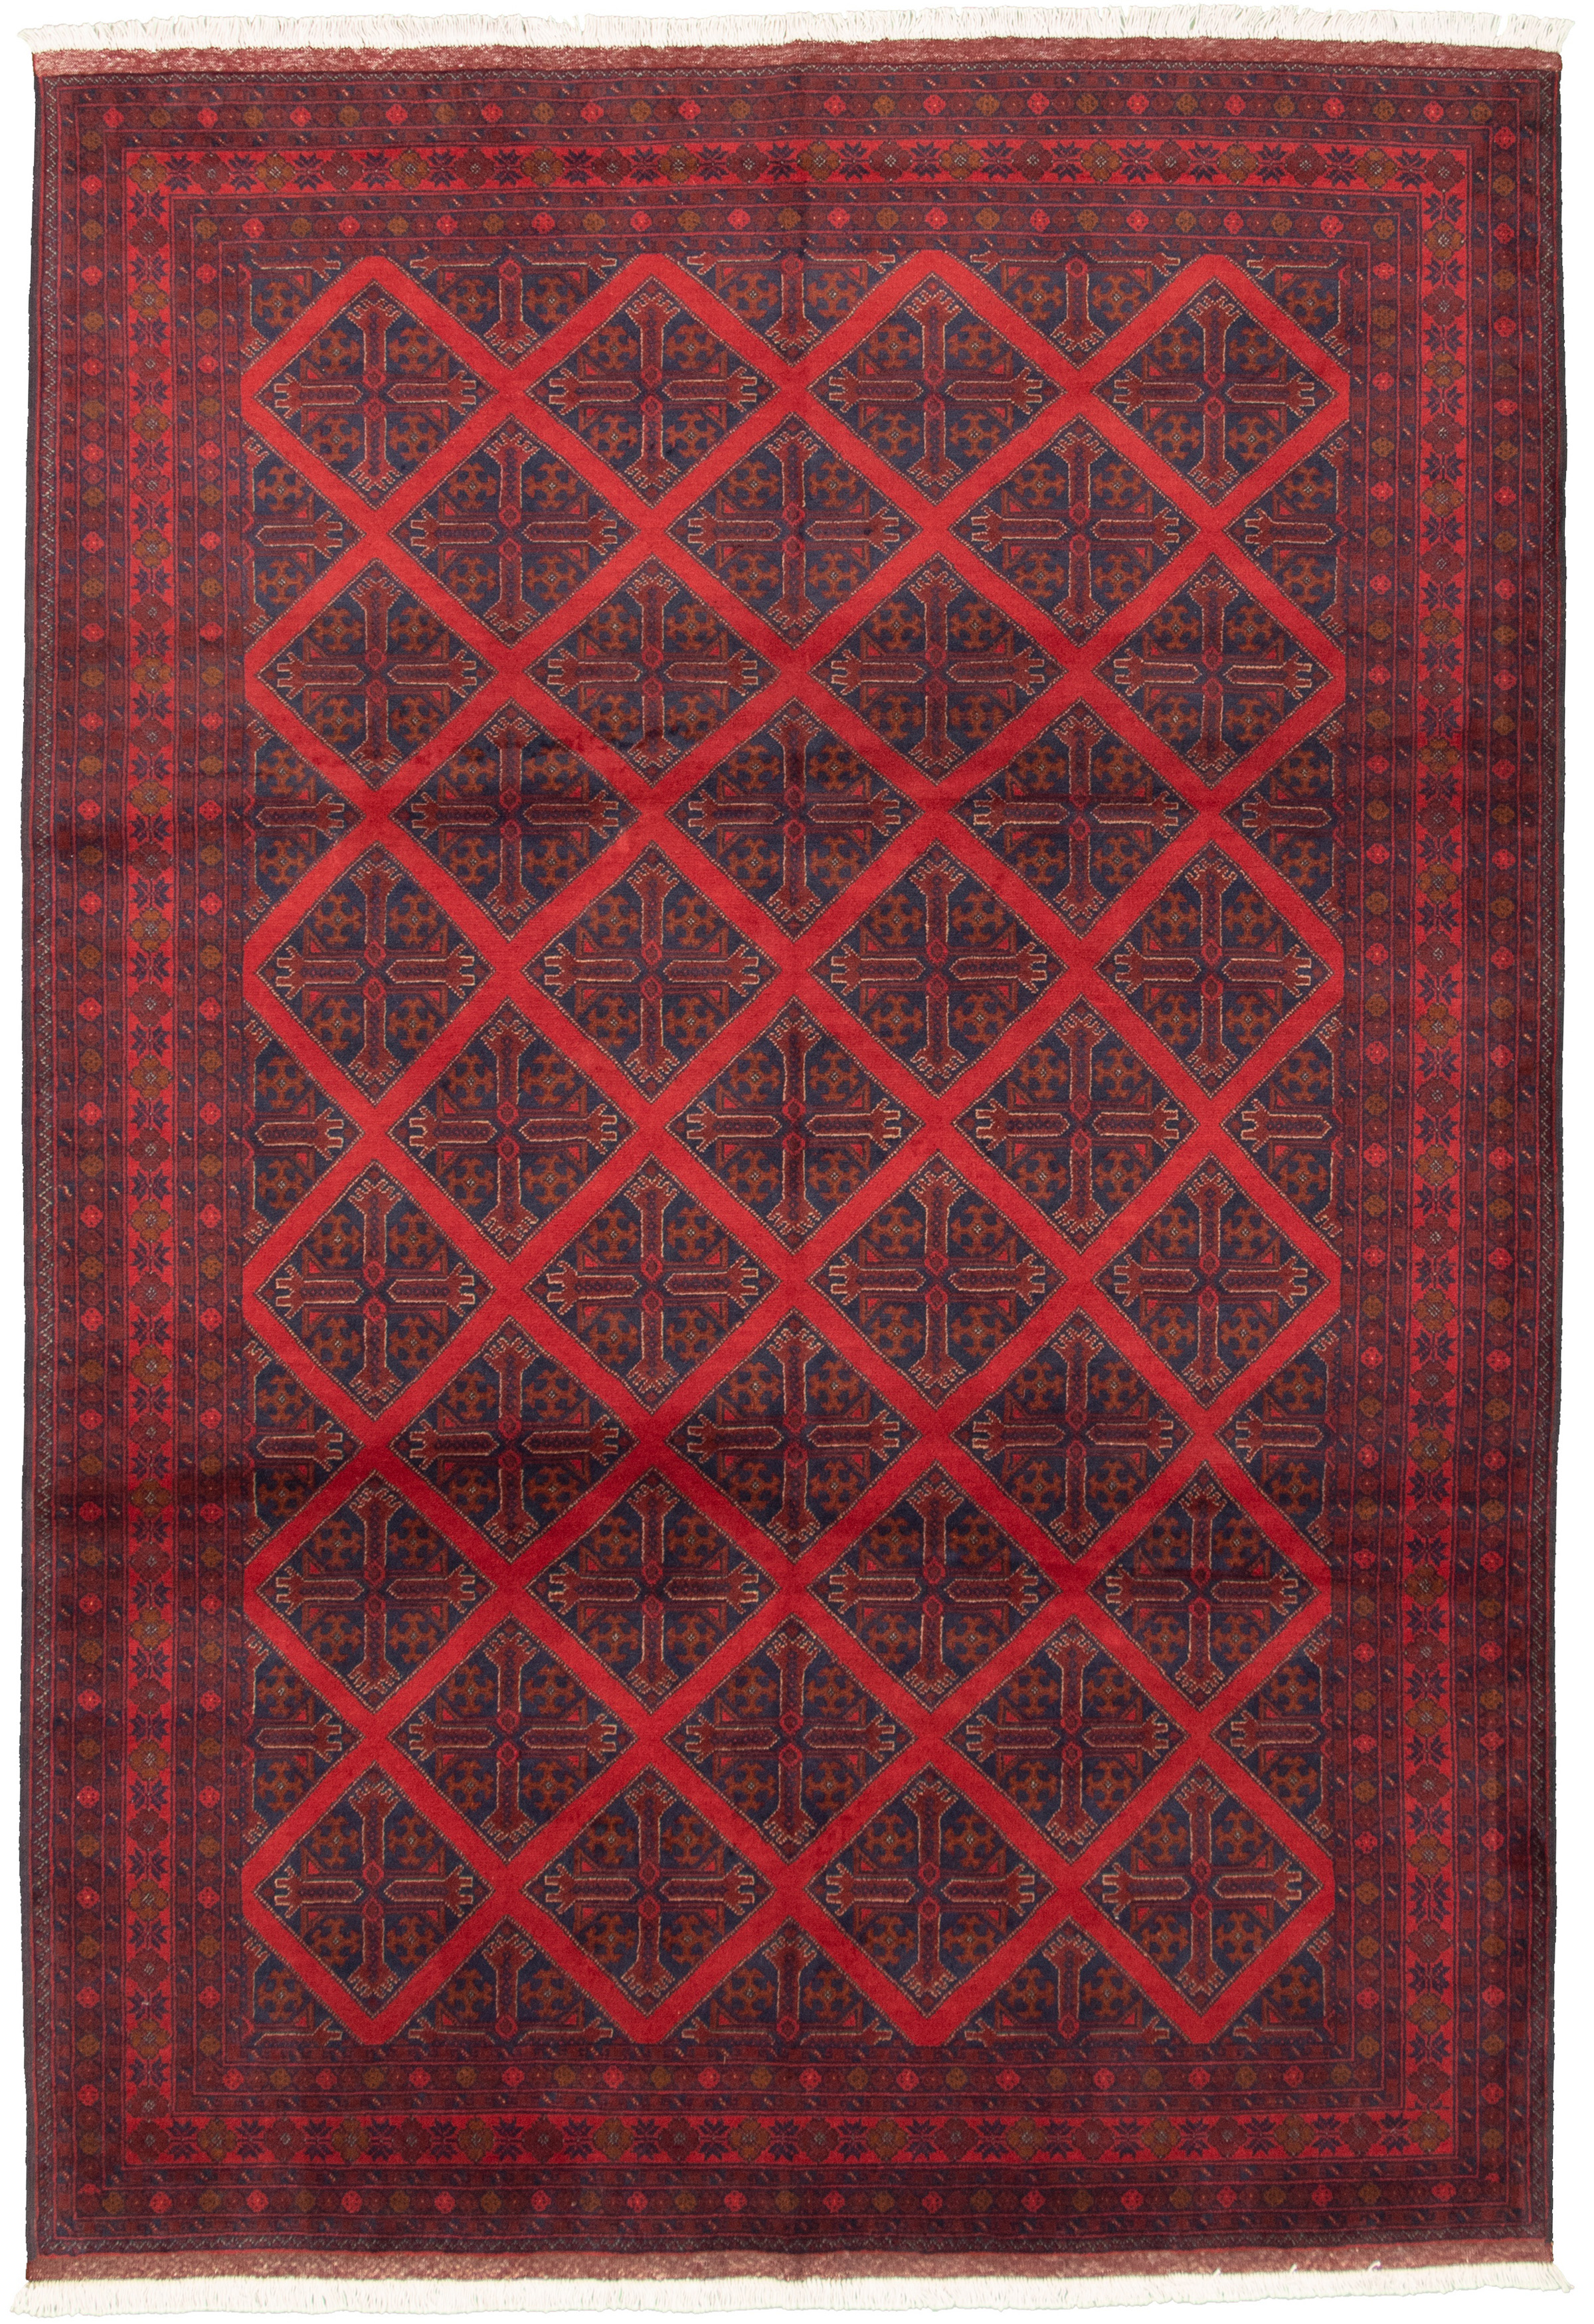 Hand-knotted Finest Khal Mohammadi Red Wool Rug 6'8" x 10'0"  Size: 6'8" x 10'0"  